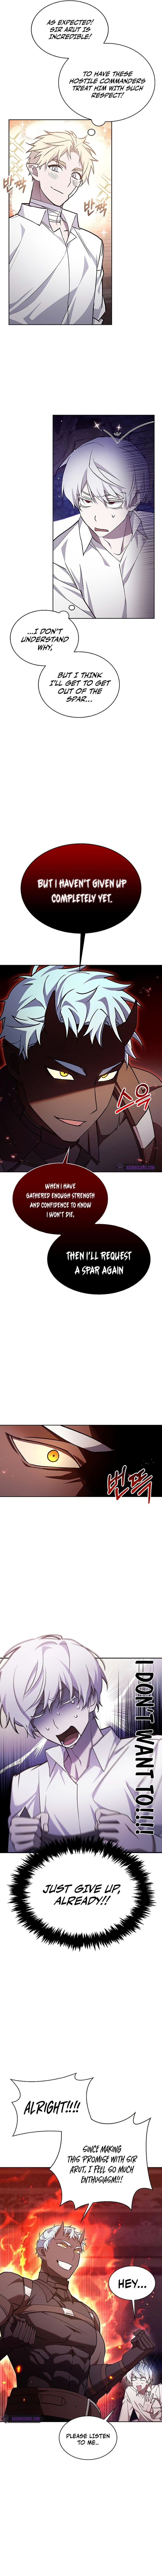 I’m Not That Kind of Talent - Chapter 5 Page 7